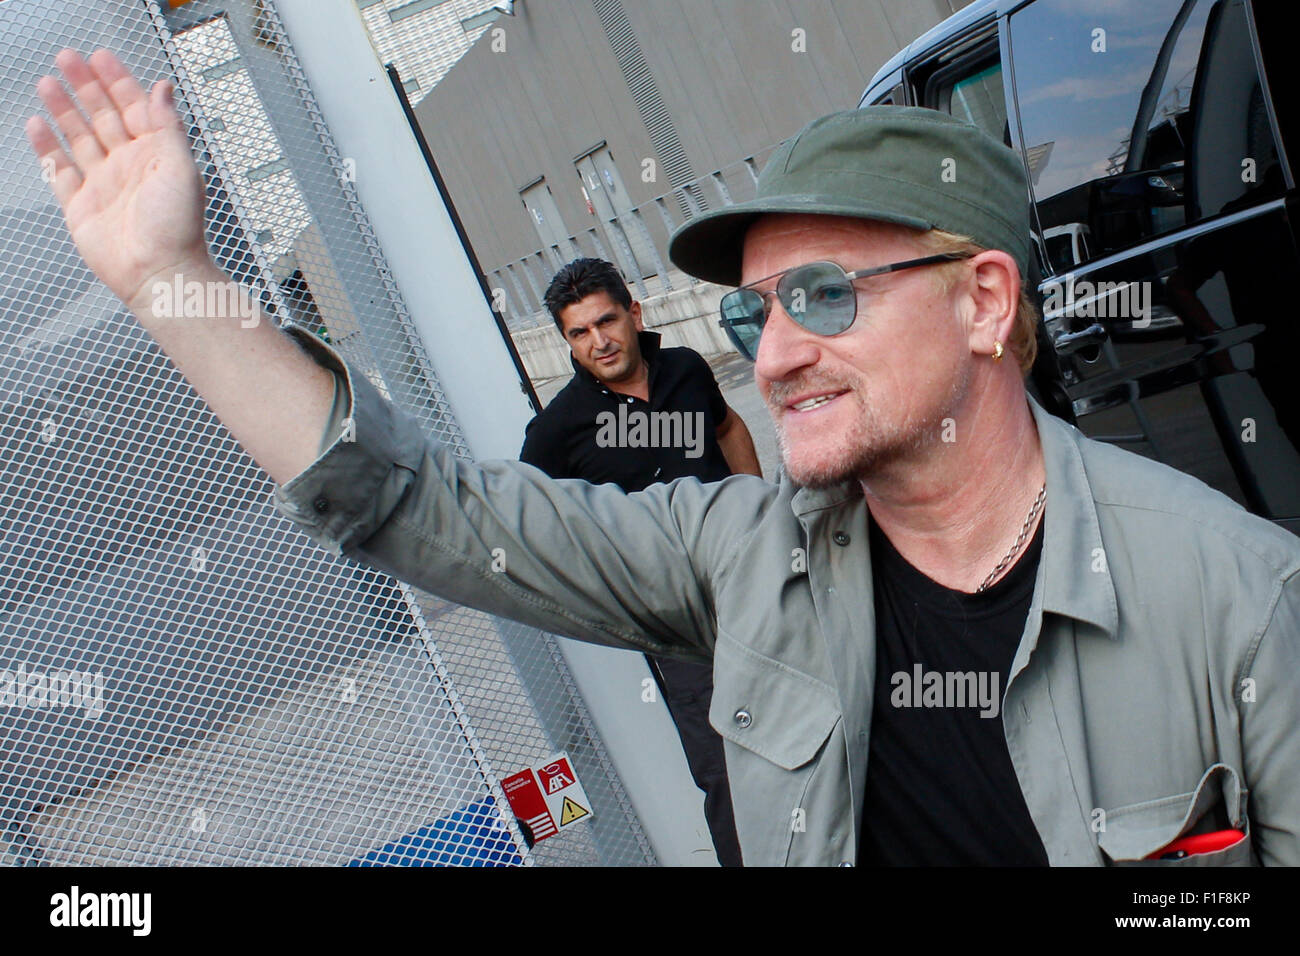 Turin, Italy. 01st Sep, 2015. Bono greets his fans. Bono Vox, the frontman of the Irish rock band U2 arrives at the Olympic Stadium where hundreds of their fans wait for press conference and autograph signing. Credit:  Elena Aquila/Pacific Press/Alamy Live News Stock Photo